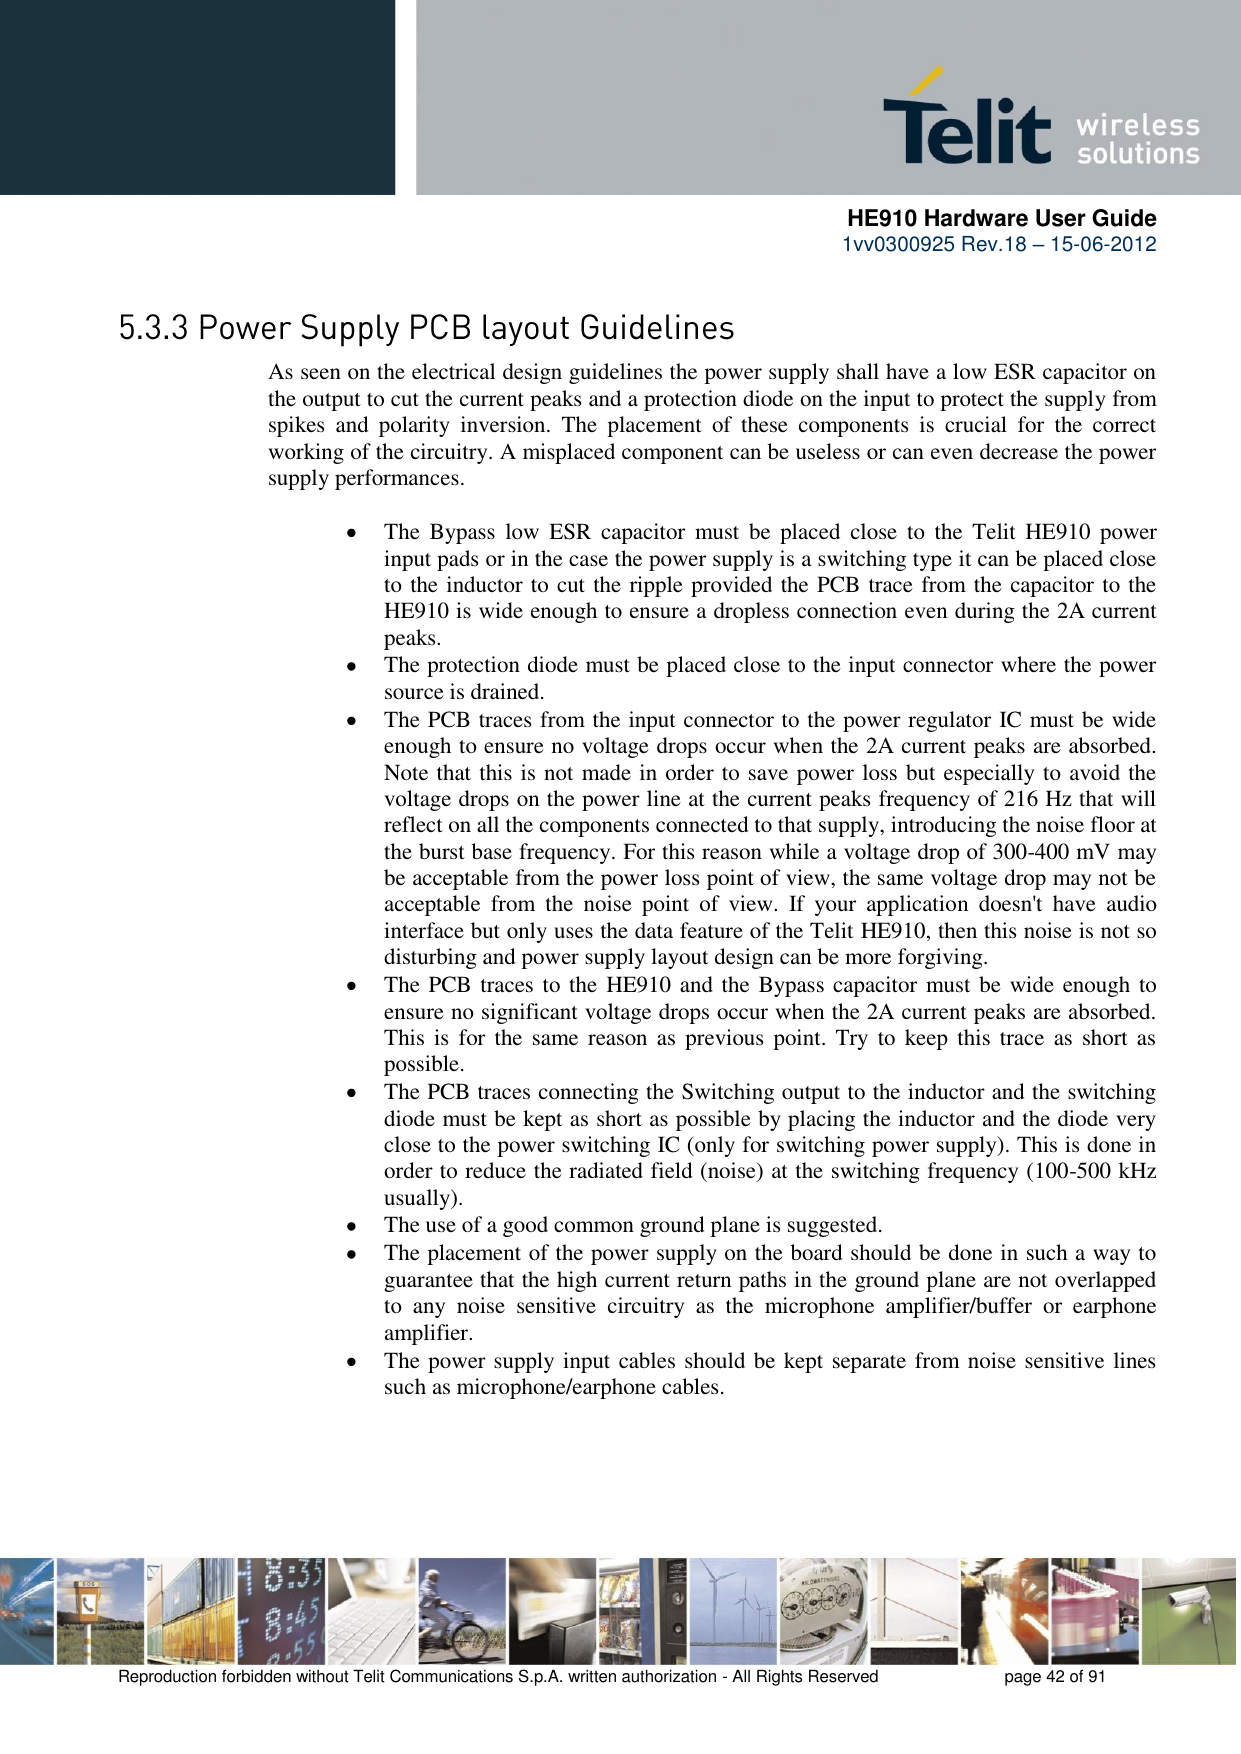      HE910 Hardware User Guide 1vv0300925 Rev.18 – 15-06-2012    Reproduction forbidden without Telit Communications S.p.A. written authorization - All Rights Reserved    page 42 of 91   As seen on the electrical design guidelines the power supply shall have a low ESR capacitor on the output to cut the current peaks and a protection diode on the input to protect the supply from spikes  and  polarity  inversion.  The  placement  of  these  components  is  crucial  for  the  correct working of the circuitry. A misplaced component can be useless or can even decrease the power supply performances.   The  Bypass  low  ESR  capacitor  must  be  placed  close  to  the  Telit  HE910  power input pads or in the case the power supply is a switching type it can be placed close to the inductor to cut the ripple provided the PCB trace from the capacitor to the HE910 is wide enough to ensure a dropless connection even during the 2A current peaks.  The protection diode must be placed close to the input connector where the power source is drained.  The PCB traces from the input connector to the power regulator IC must be wide enough to ensure no voltage drops occur when the 2A current peaks are absorbed. Note that this is not made in order to save power loss but especially to avoid the voltage drops on the power line at the current peaks frequency of 216 Hz that will reflect on all the components connected to that supply, introducing the noise floor at the burst base frequency. For this reason while a voltage drop of 300-400 mV may be acceptable from the power loss point of view, the same voltage drop may not be acceptable  from  the  noise  point  of  view.  If  your  application  doesn&apos;t  have  audio interface but only uses the data feature of the Telit HE910, then this noise is not so disturbing and power supply layout design can be more forgiving.  The PCB traces to the HE910 and the Bypass capacitor must be wide enough to ensure no significant voltage drops occur when the 2A current peaks are absorbed. This  is  for  the same reason as  previous point. Try  to  keep  this  trace  as short as possible.  The PCB traces connecting the Switching output to the inductor and the switching diode must be kept as short as possible by placing the inductor and the diode very close to the power switching IC (only for switching power supply). This is done in order to reduce the radiated field (noise) at the switching frequency (100-500 kHz usually).  The use of a good common ground plane is suggested.  The placement of the power supply on the board should be done in such a way to guarantee that the high current return paths in the ground plane are not overlapped to  any  noise  sensitive  circuitry  as  the  microphone  amplifier/buffer  or  earphone amplifier.  The power supply input cables should be kept separate from noise sensitive lines such as microphone/earphone cables.  